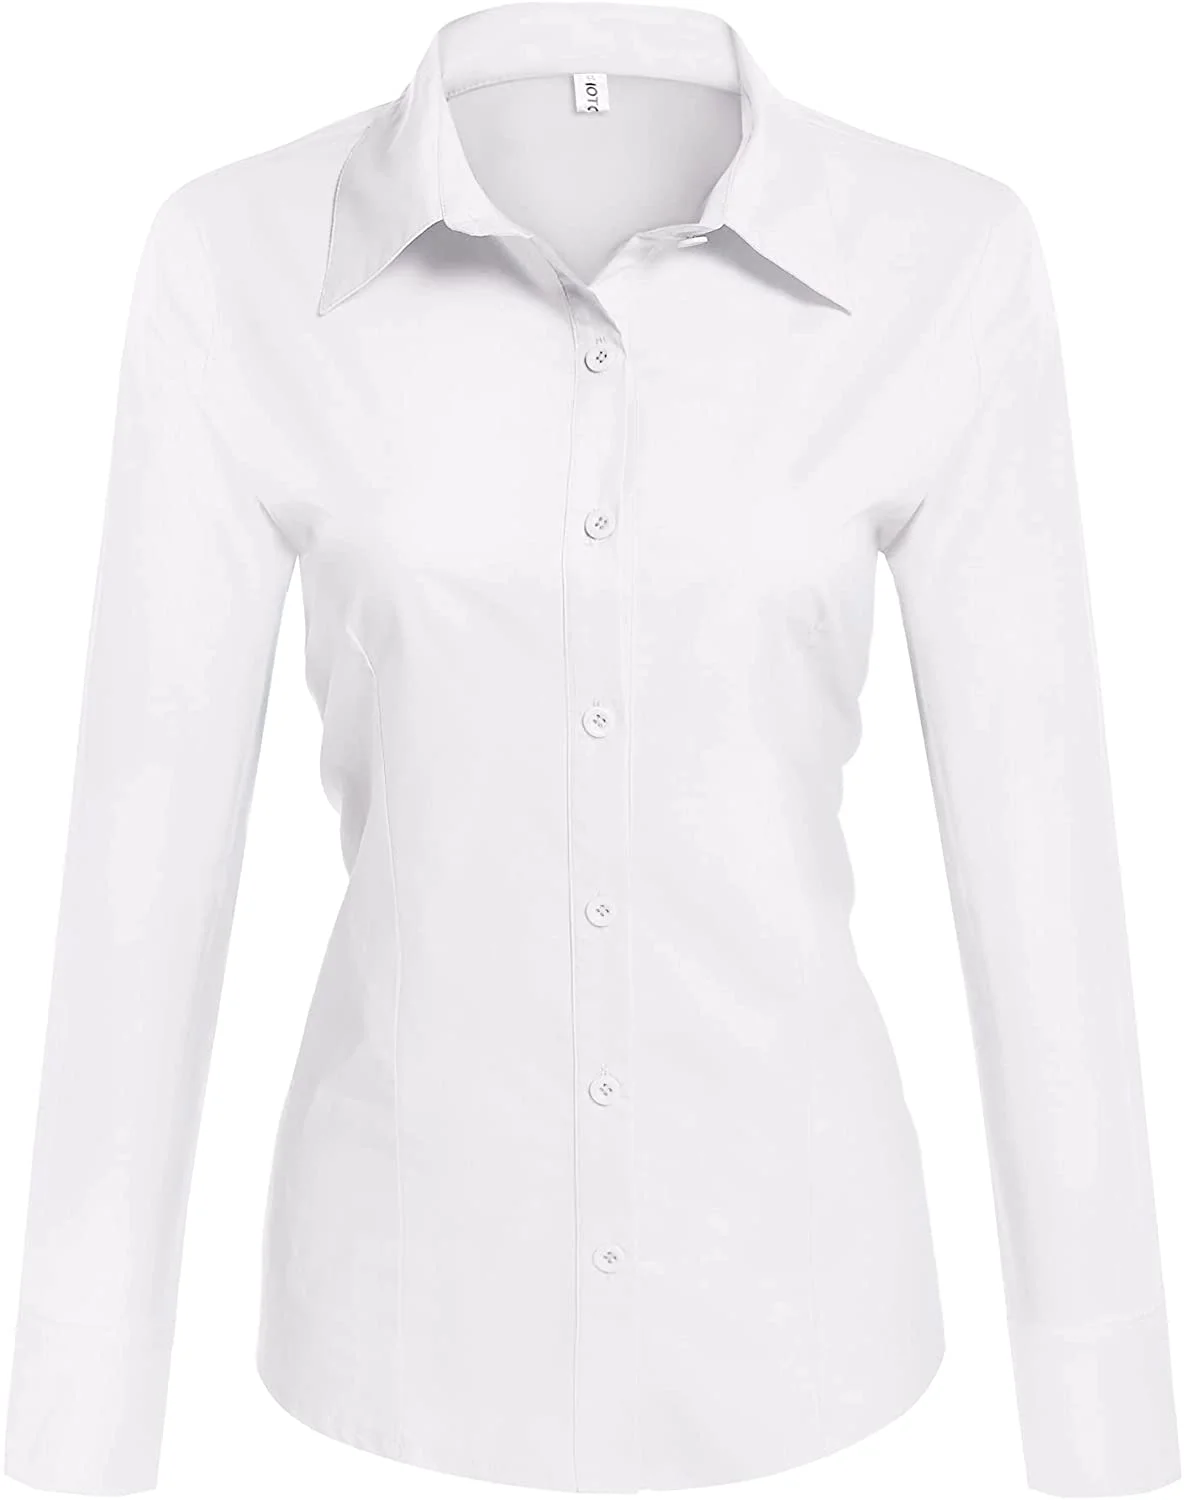 Wholesale Womens Cotton Basic Button Down Shirt Slim Fit Dress Shirts Manufacturers In Bangladesh Factory Supplier